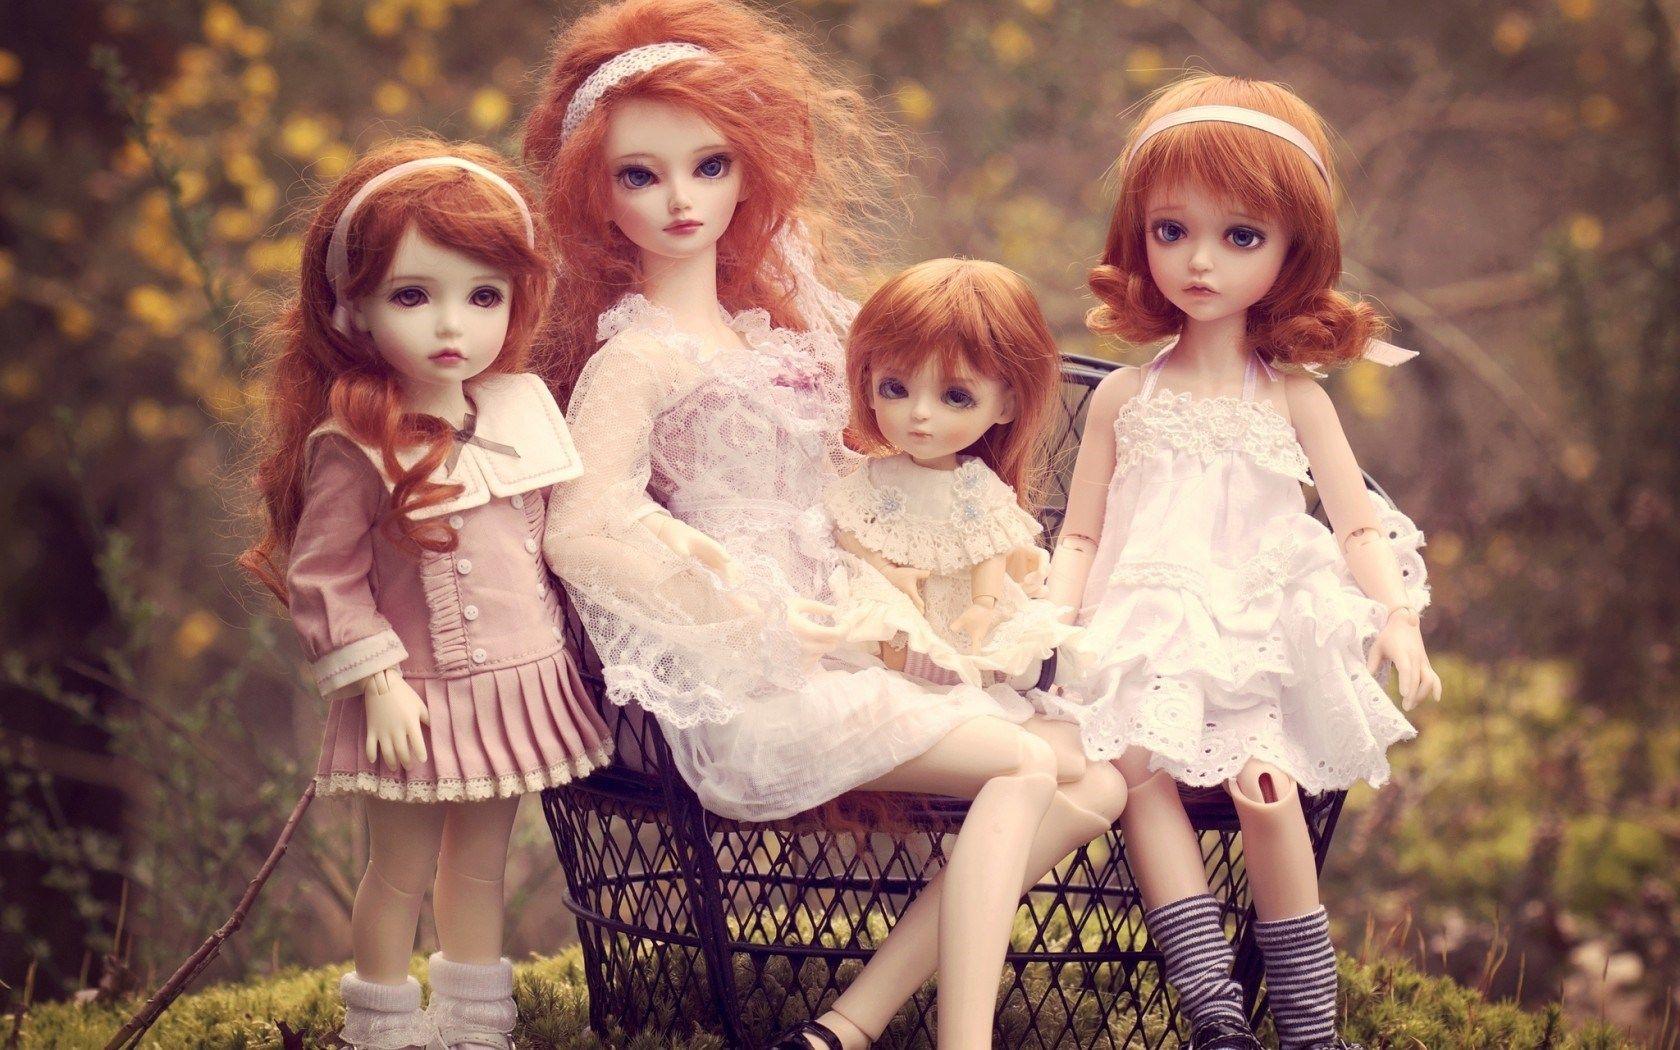 Beautiful Dolls Picture, High Definition, High Quality